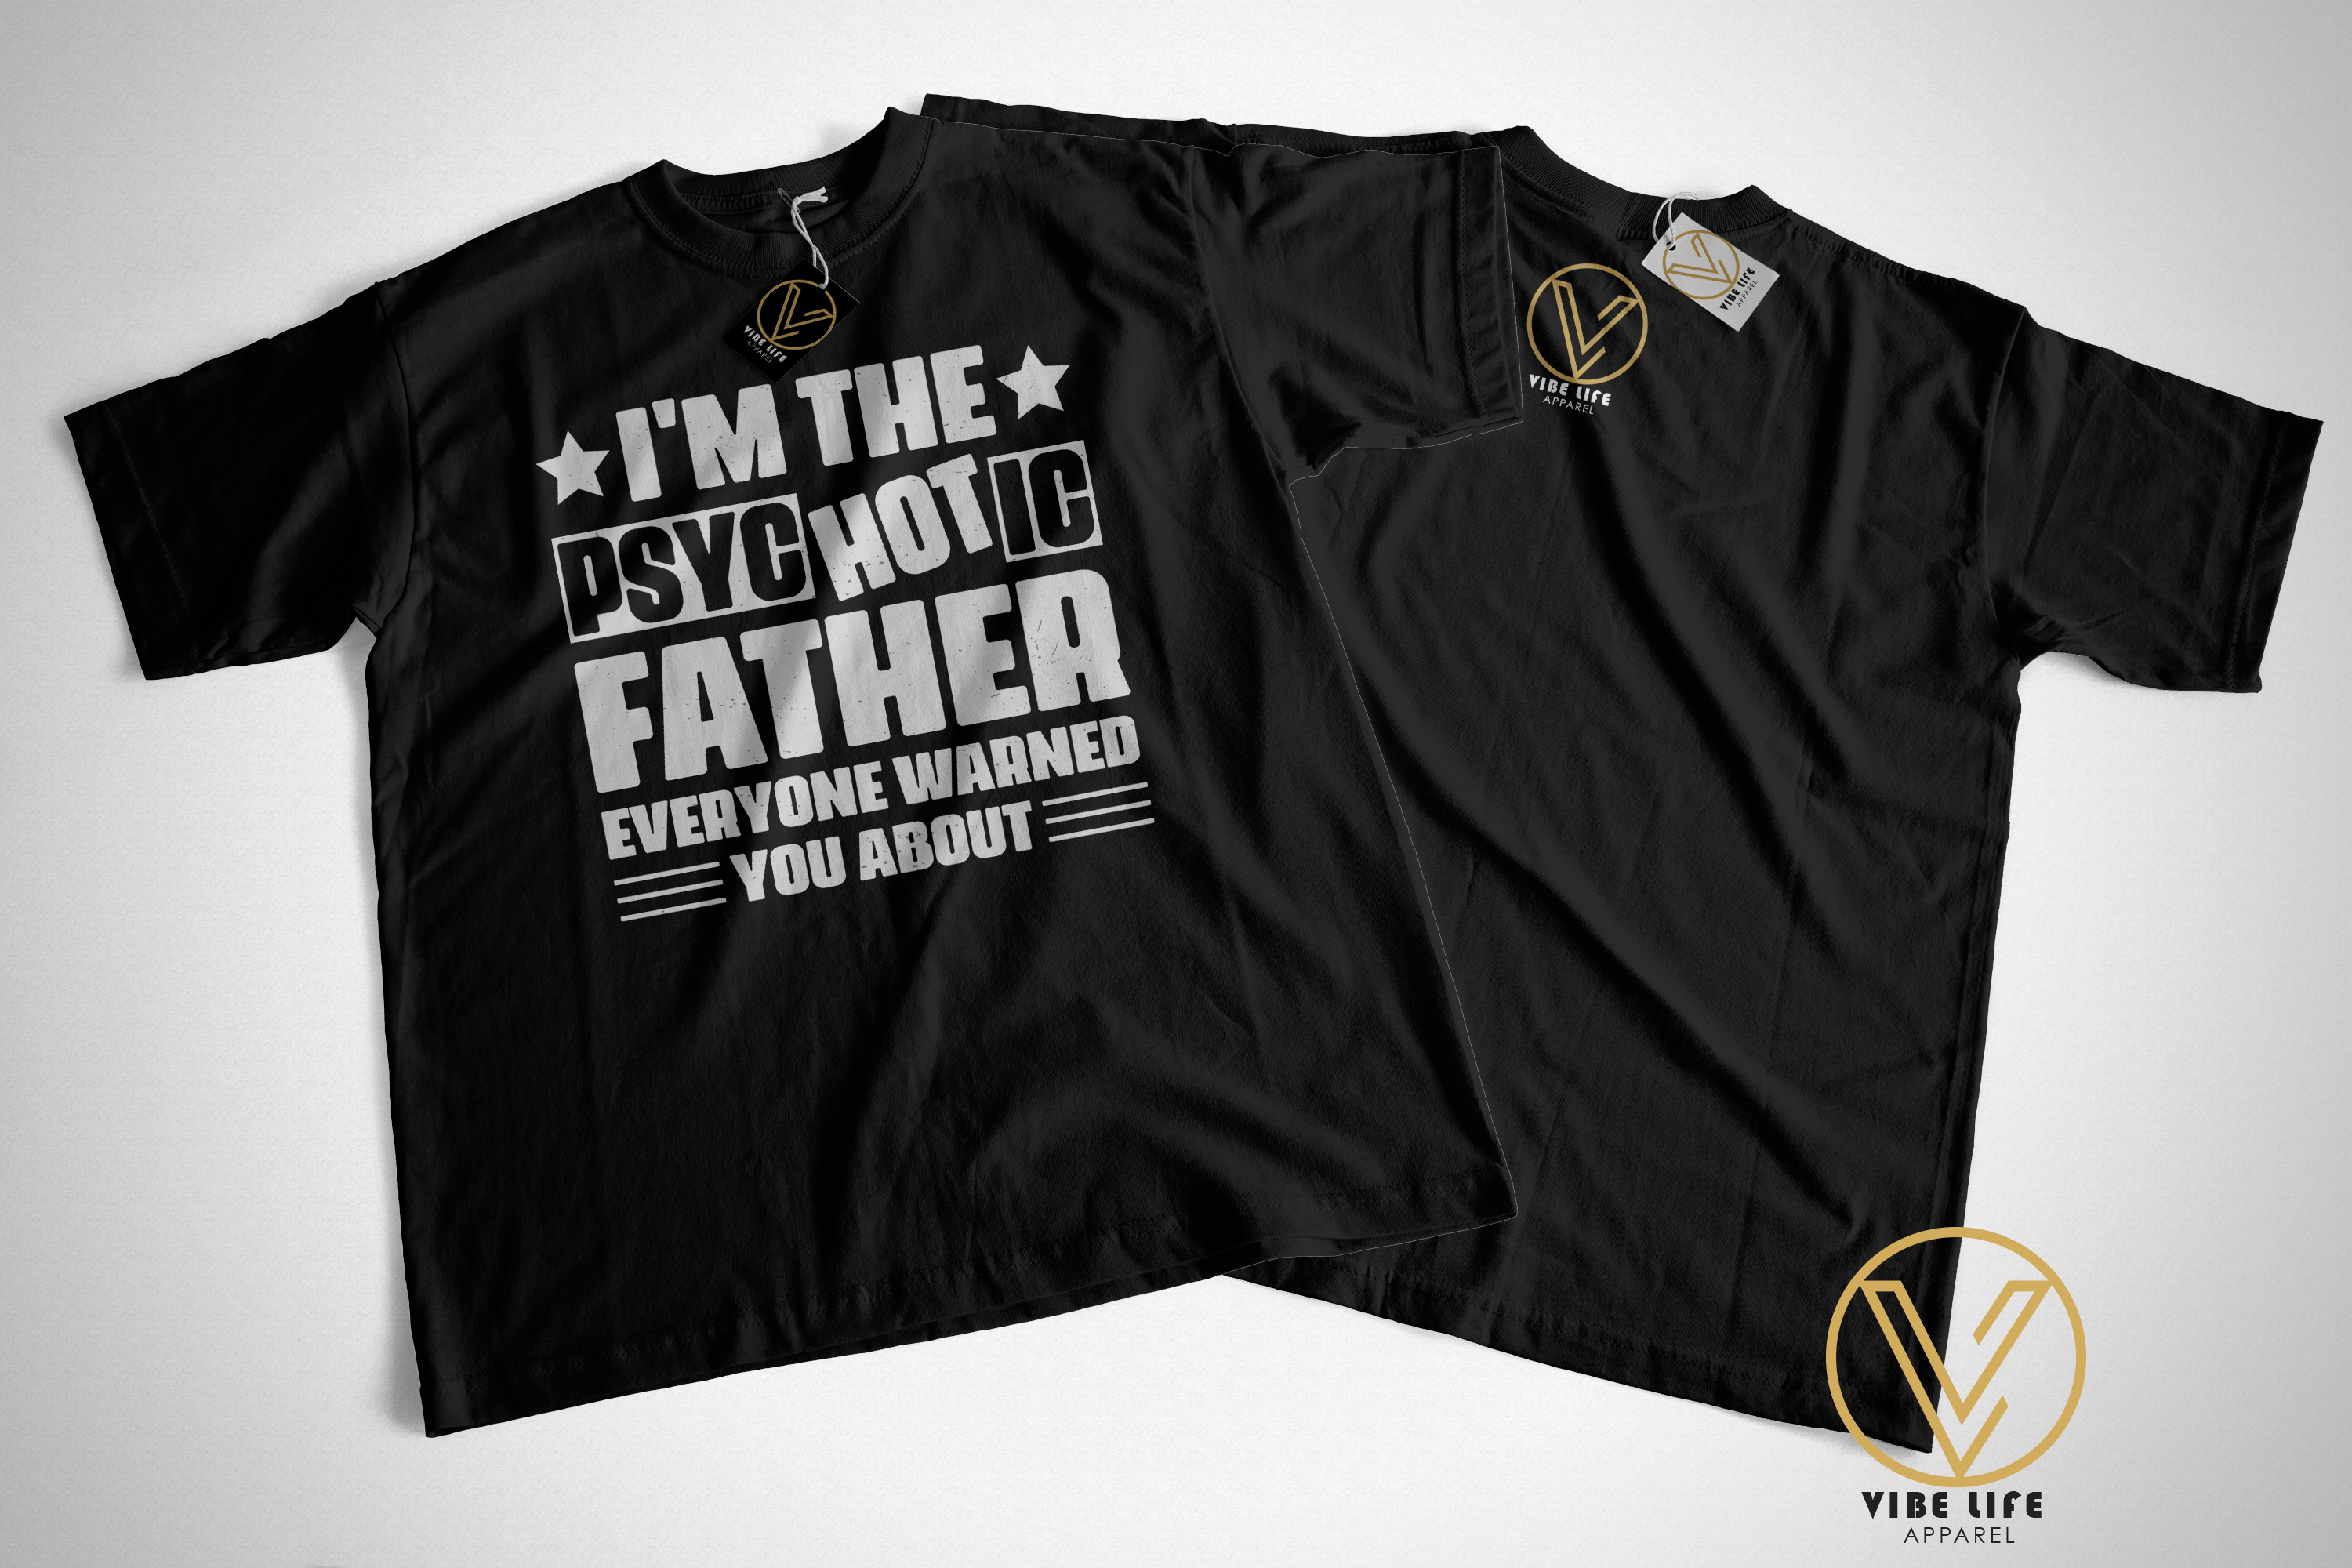 I'm the psyc-HOT-tic Father - Unisex Softstyle Crewneck Tee